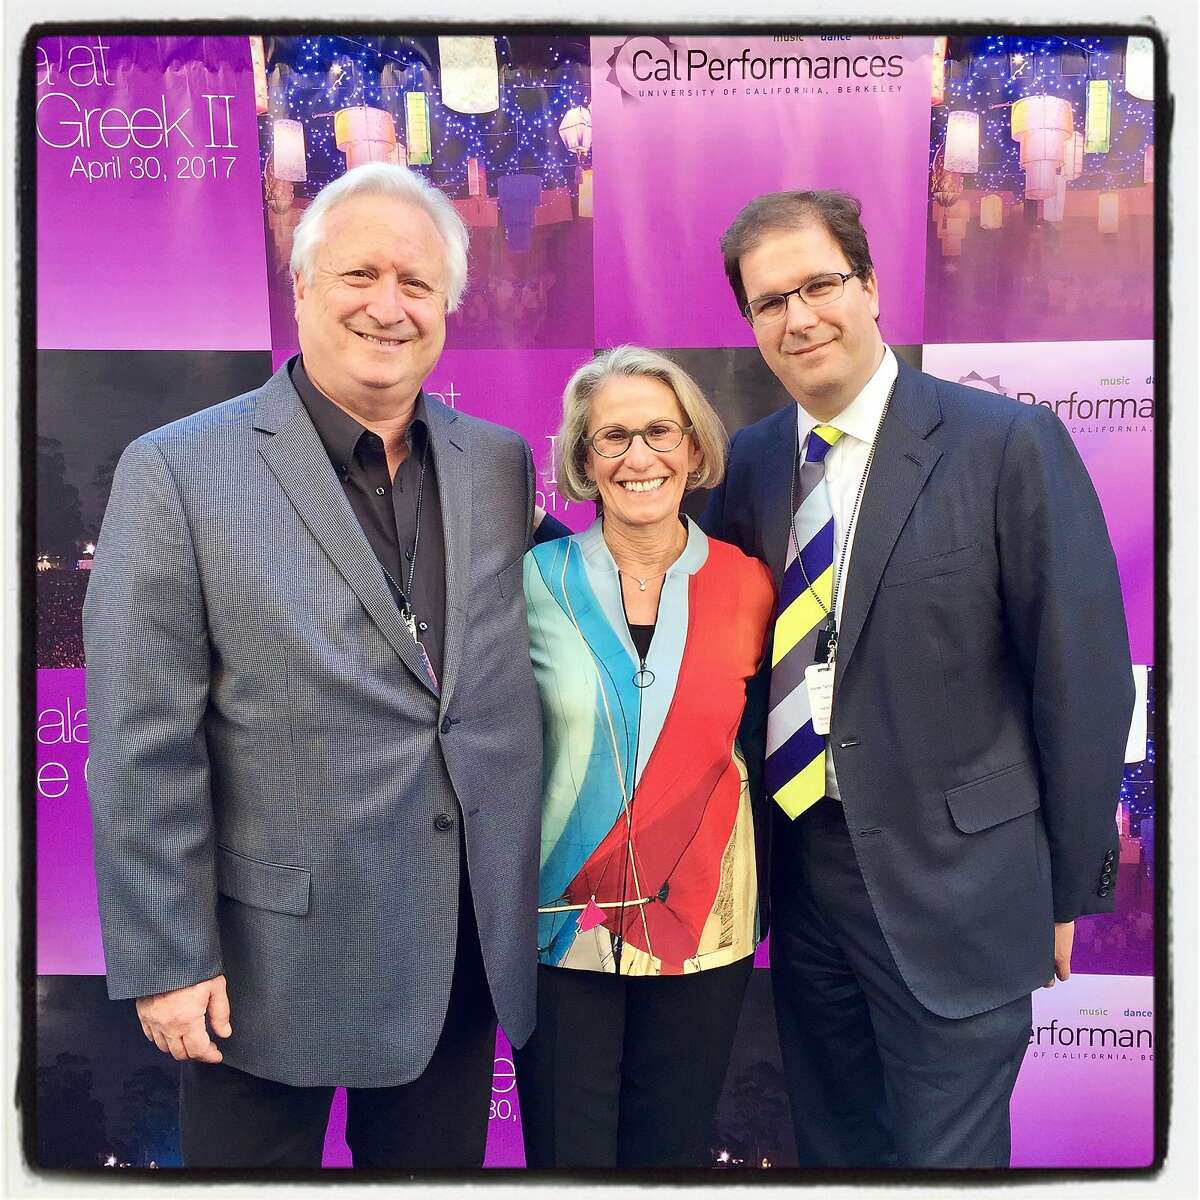 APE founder Gregg Perloff and his wife, Laura Perloff (left) with Cal Performances Artistic Director Mat�as Tarnopolsky at Gala for the Greek II. April 30, 2017.